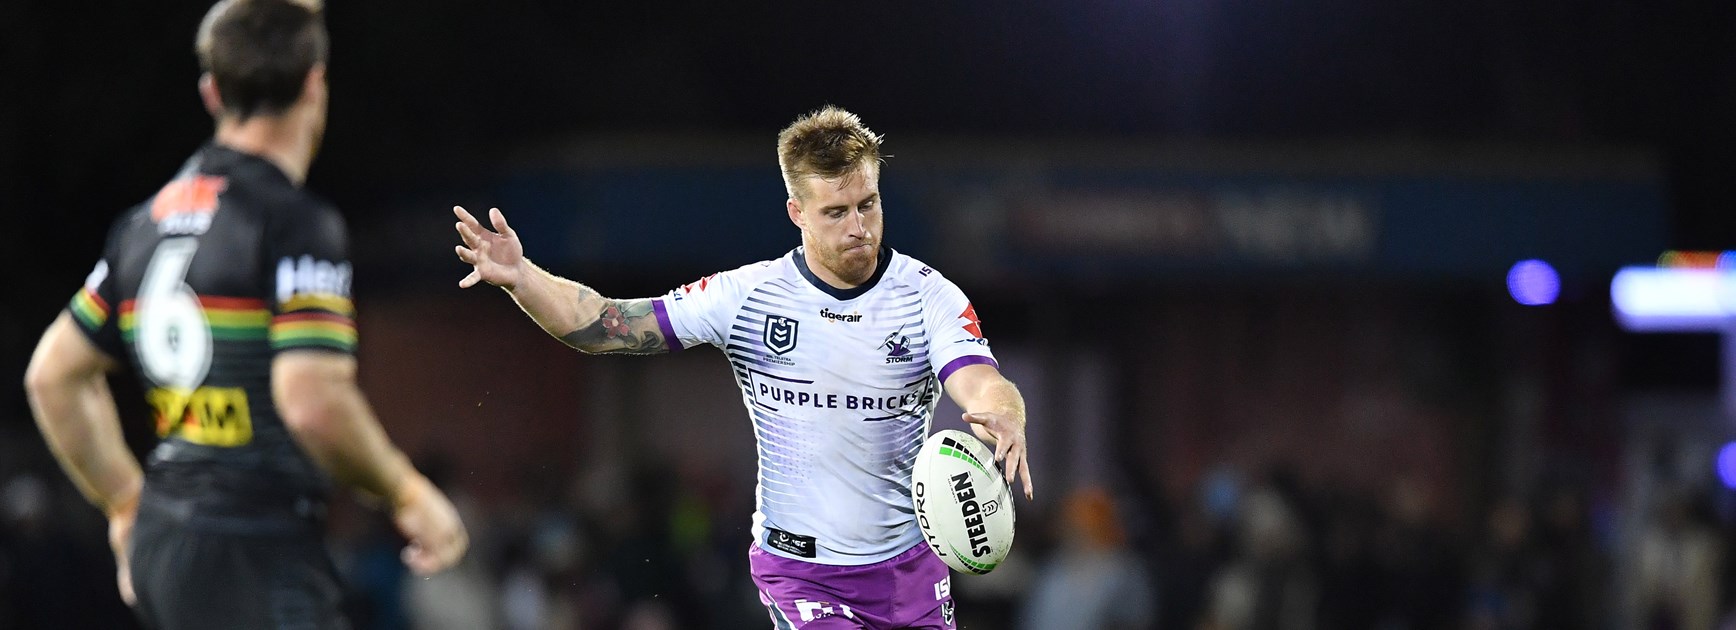 Strong second half sees Storm prevail